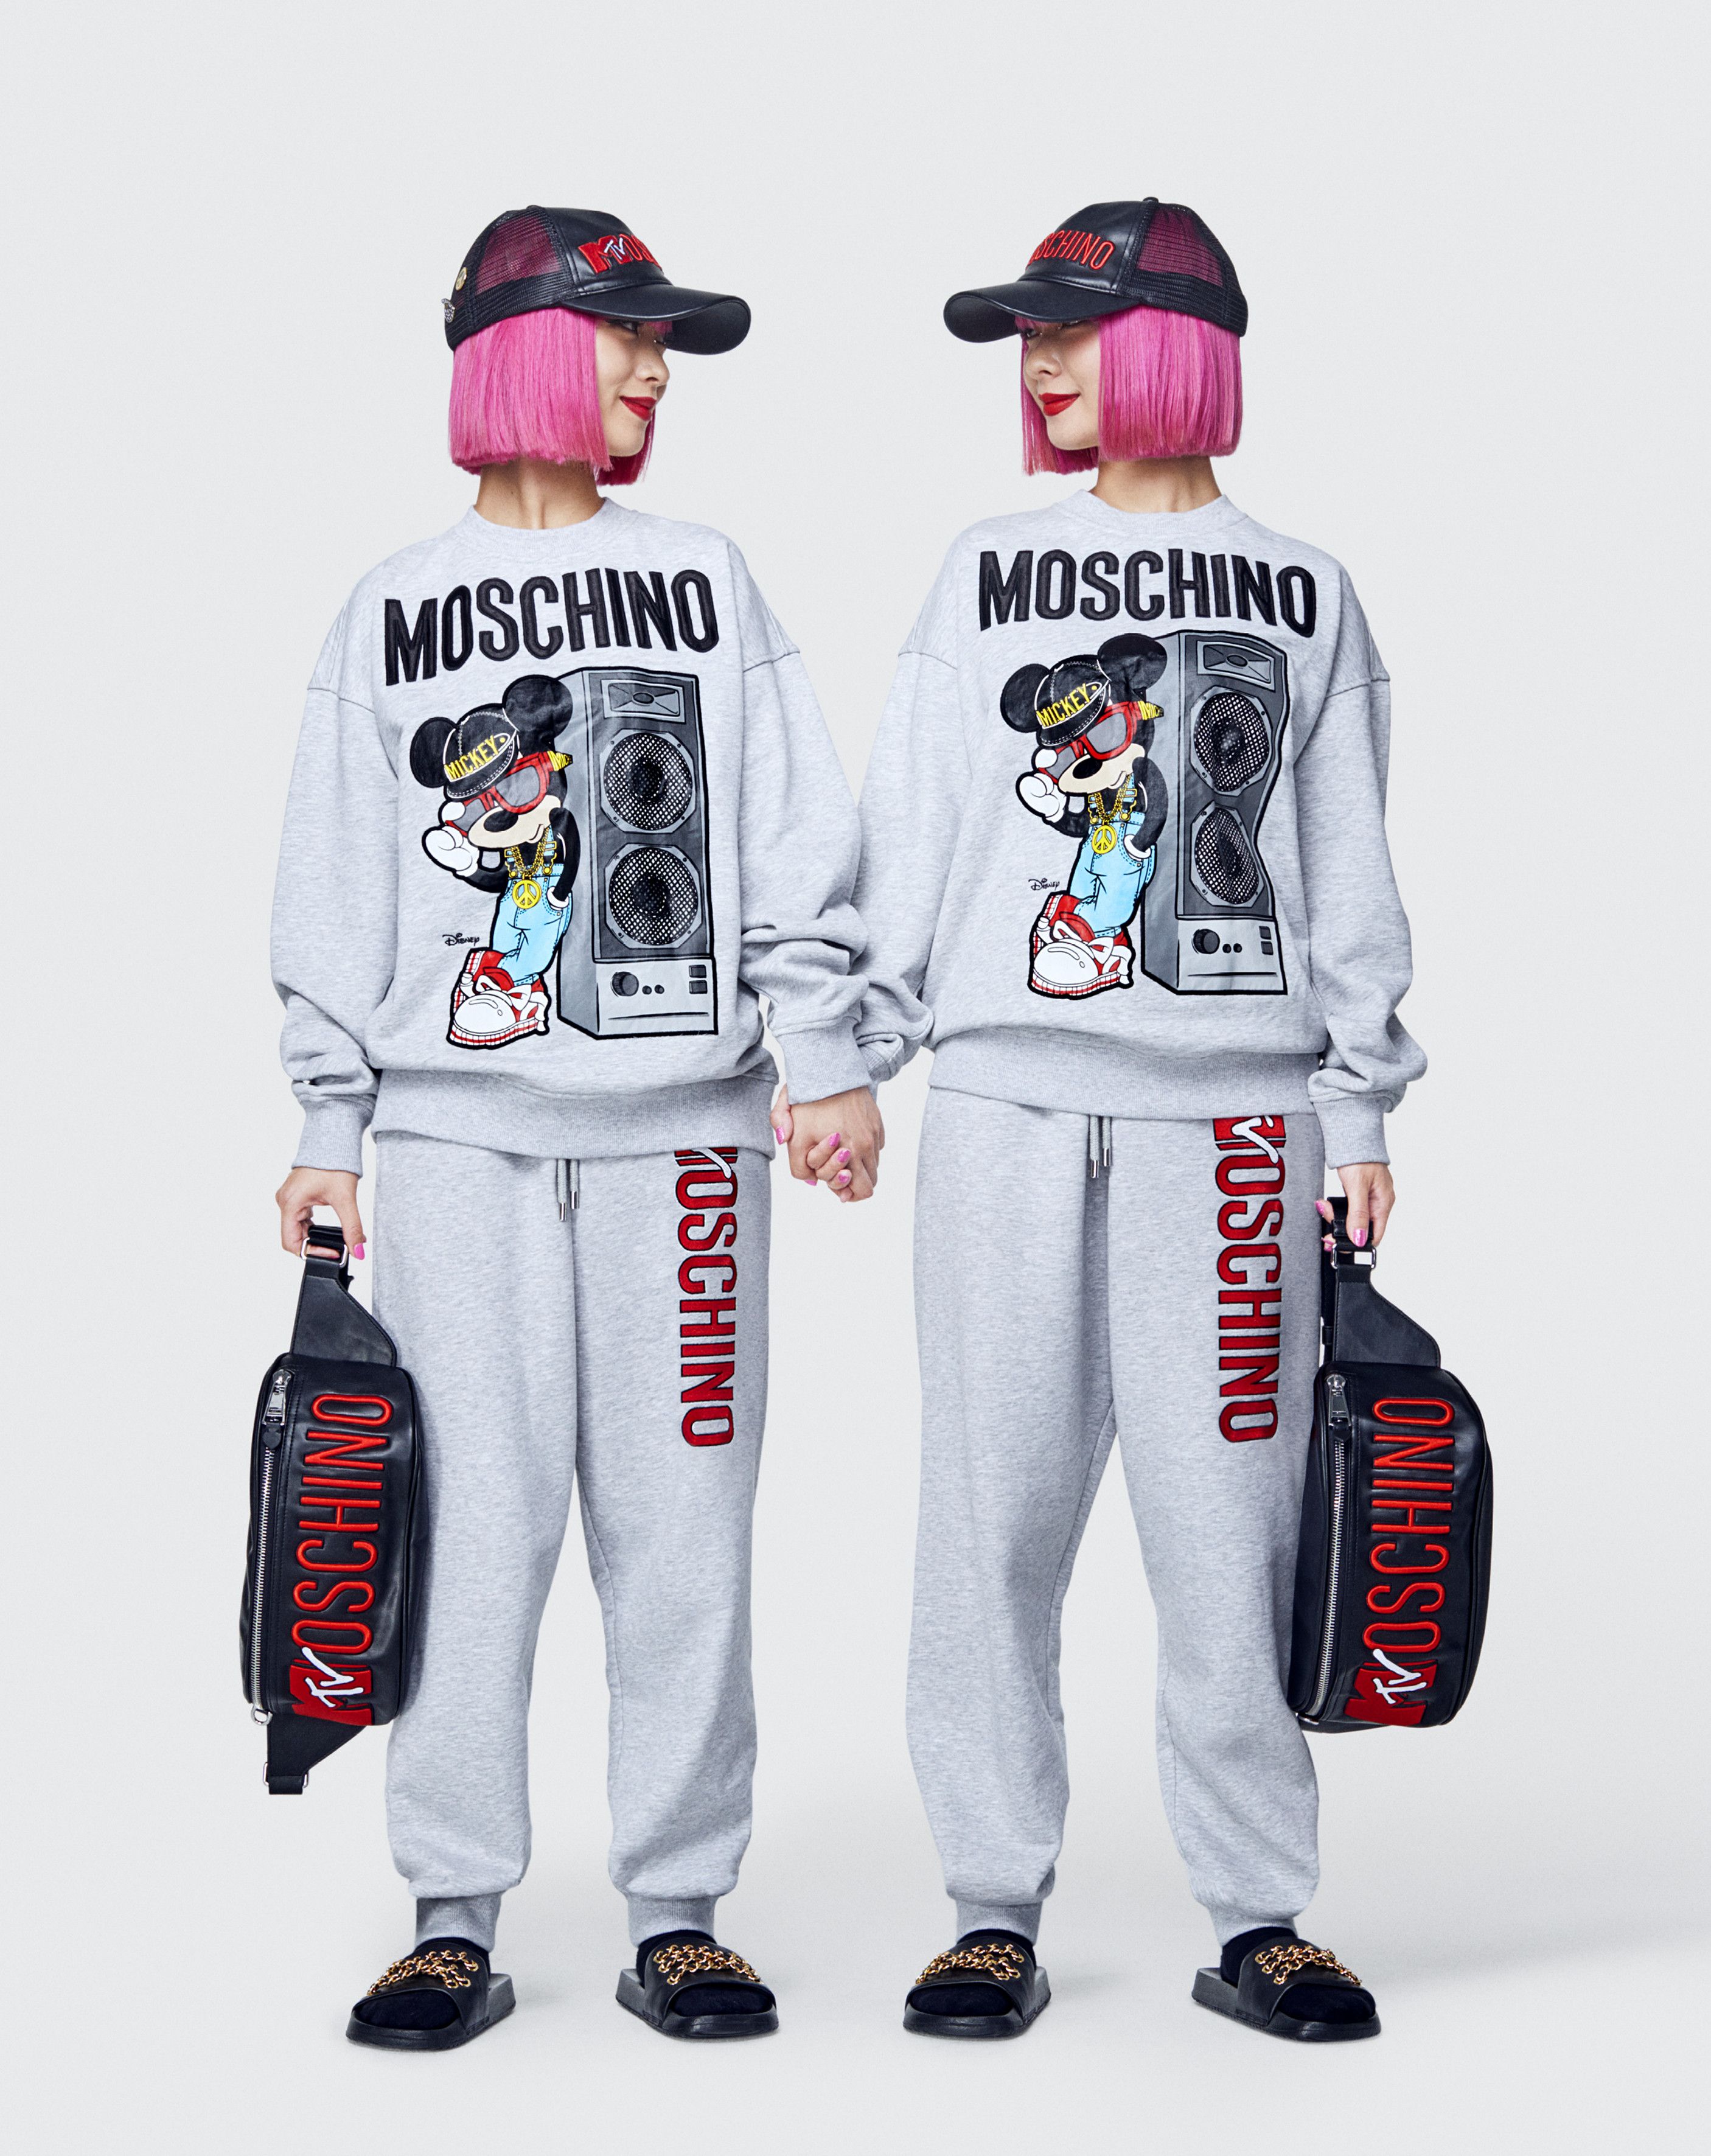 moschino for h&m